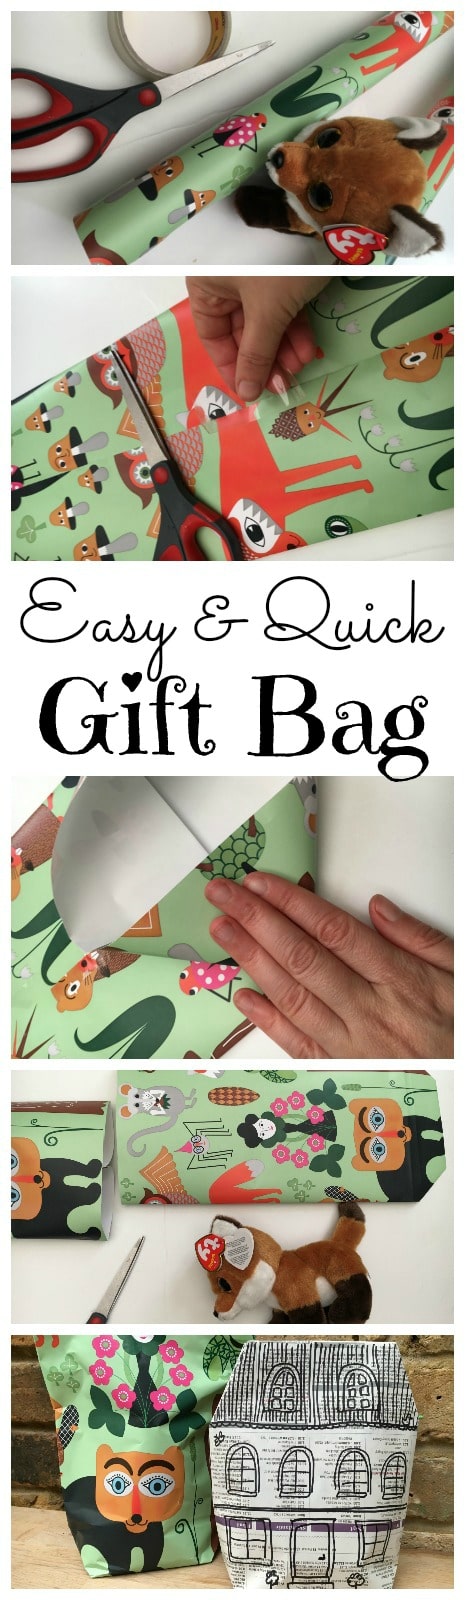 Easy Diy Gift Bag For Awkward Gifts Red Ted Art